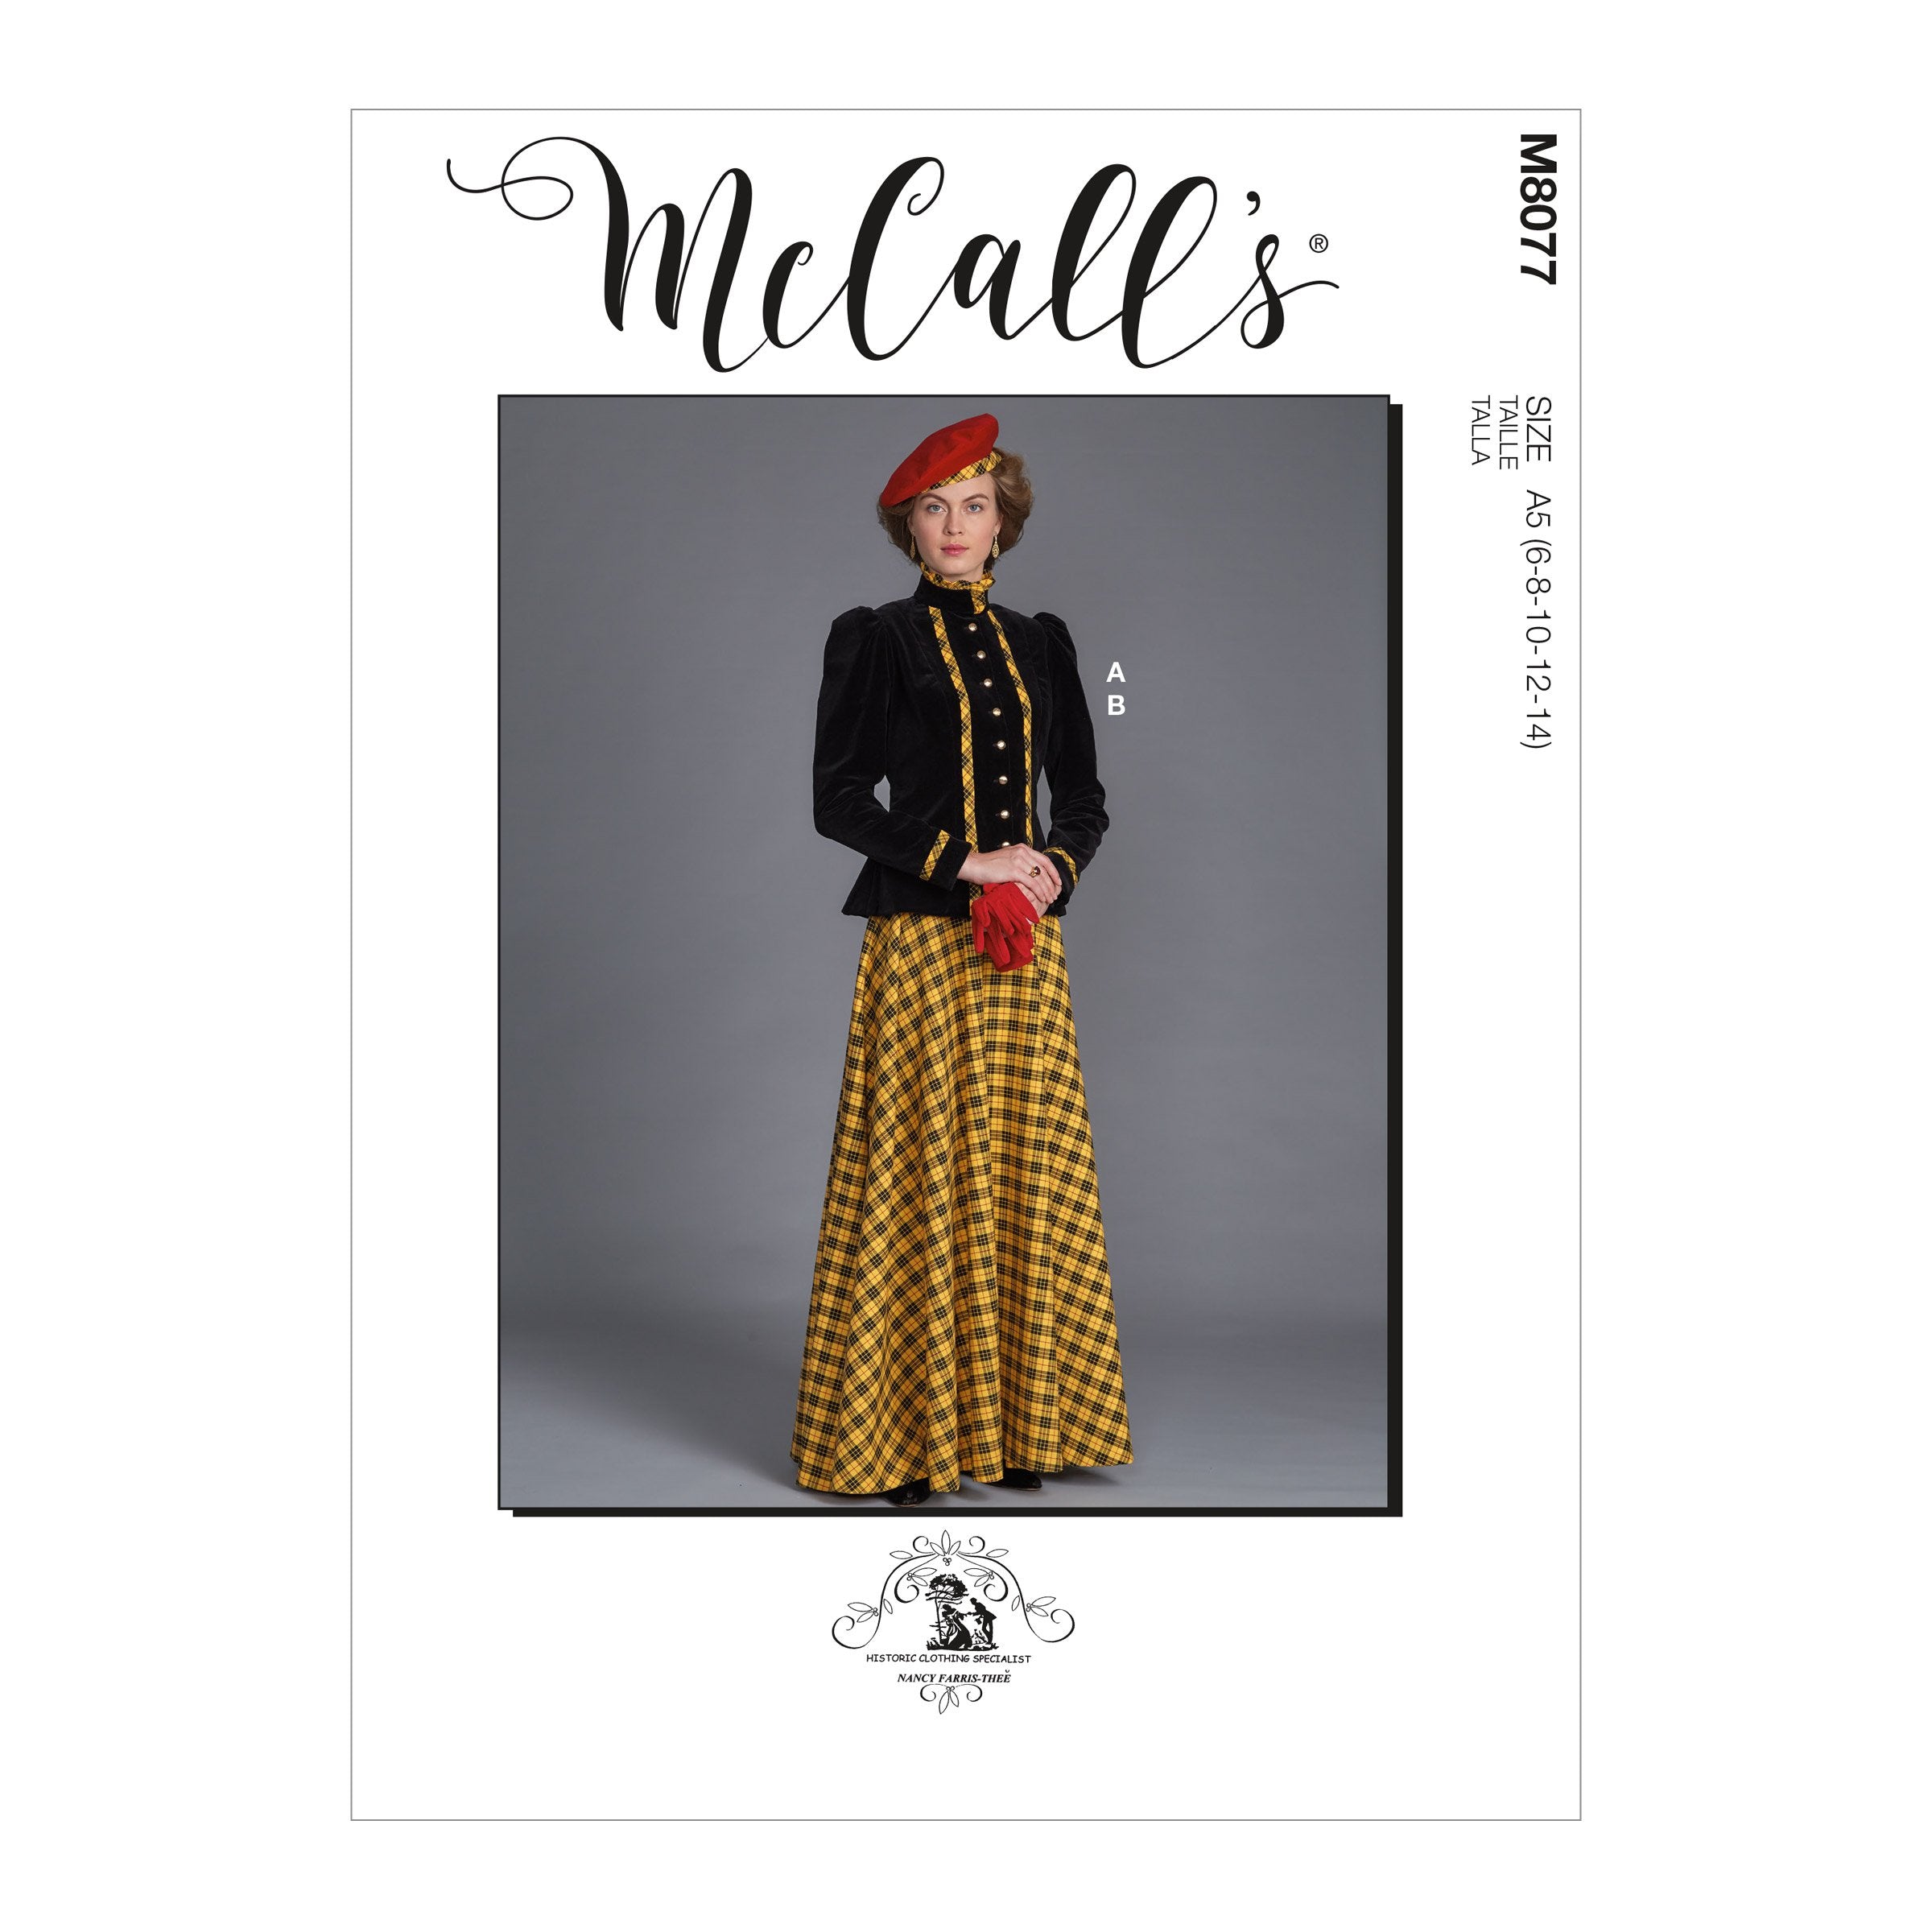 McCall's 8077 Historical Jacket and Skirt sewing pattern from Jaycotts Sewing Supplies